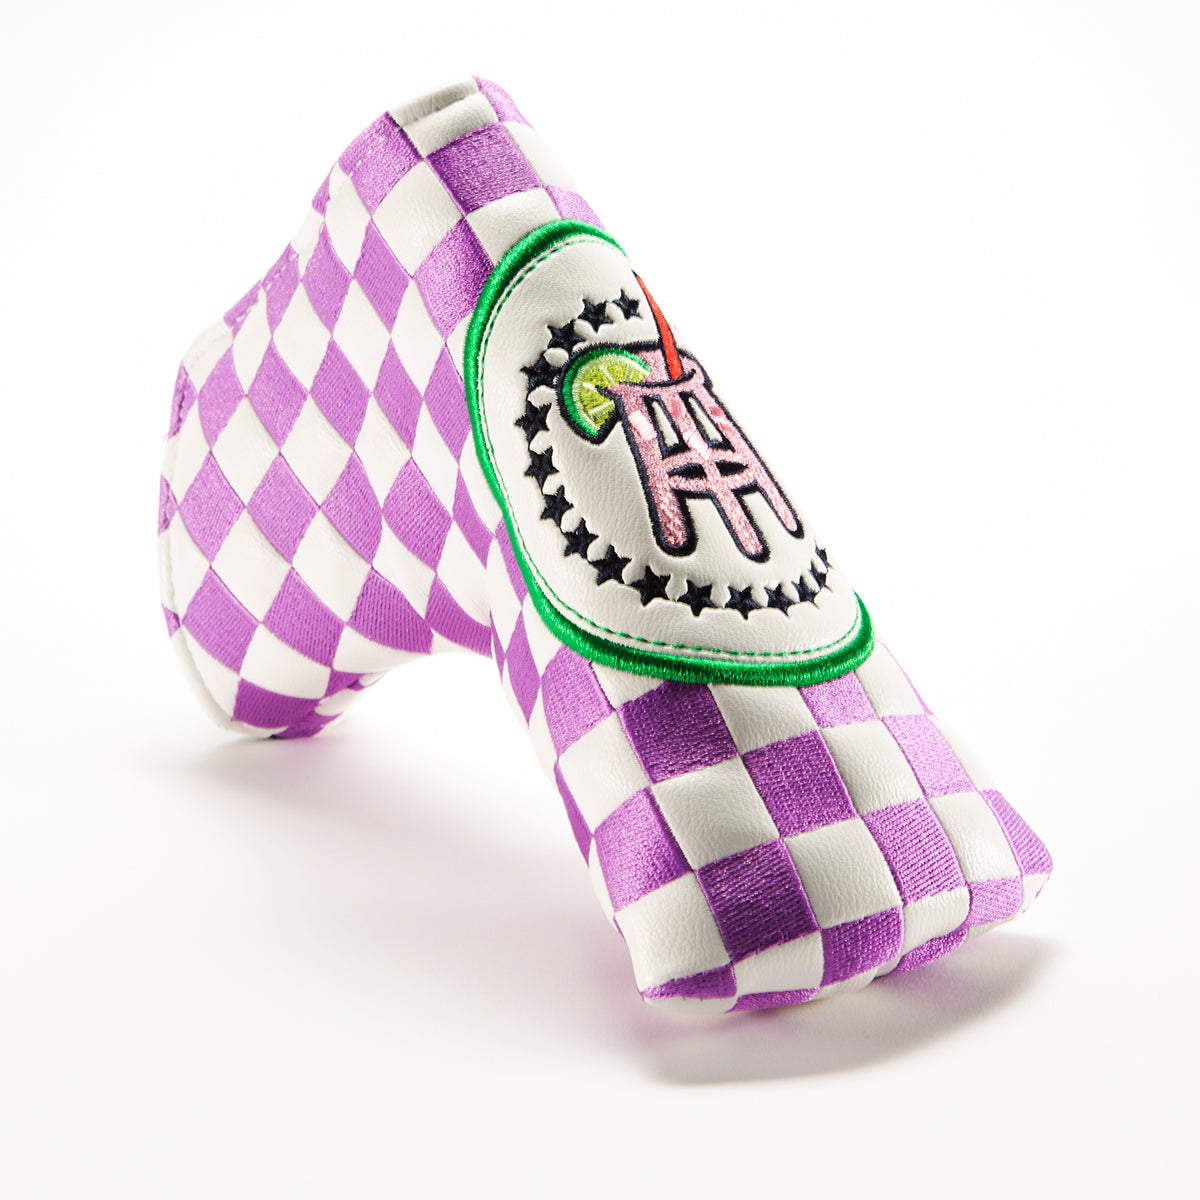 Transfusion Checkered Blade Putter Cover-Golf Accessories-Fore Play-Purple-One Size-Barstool Sports